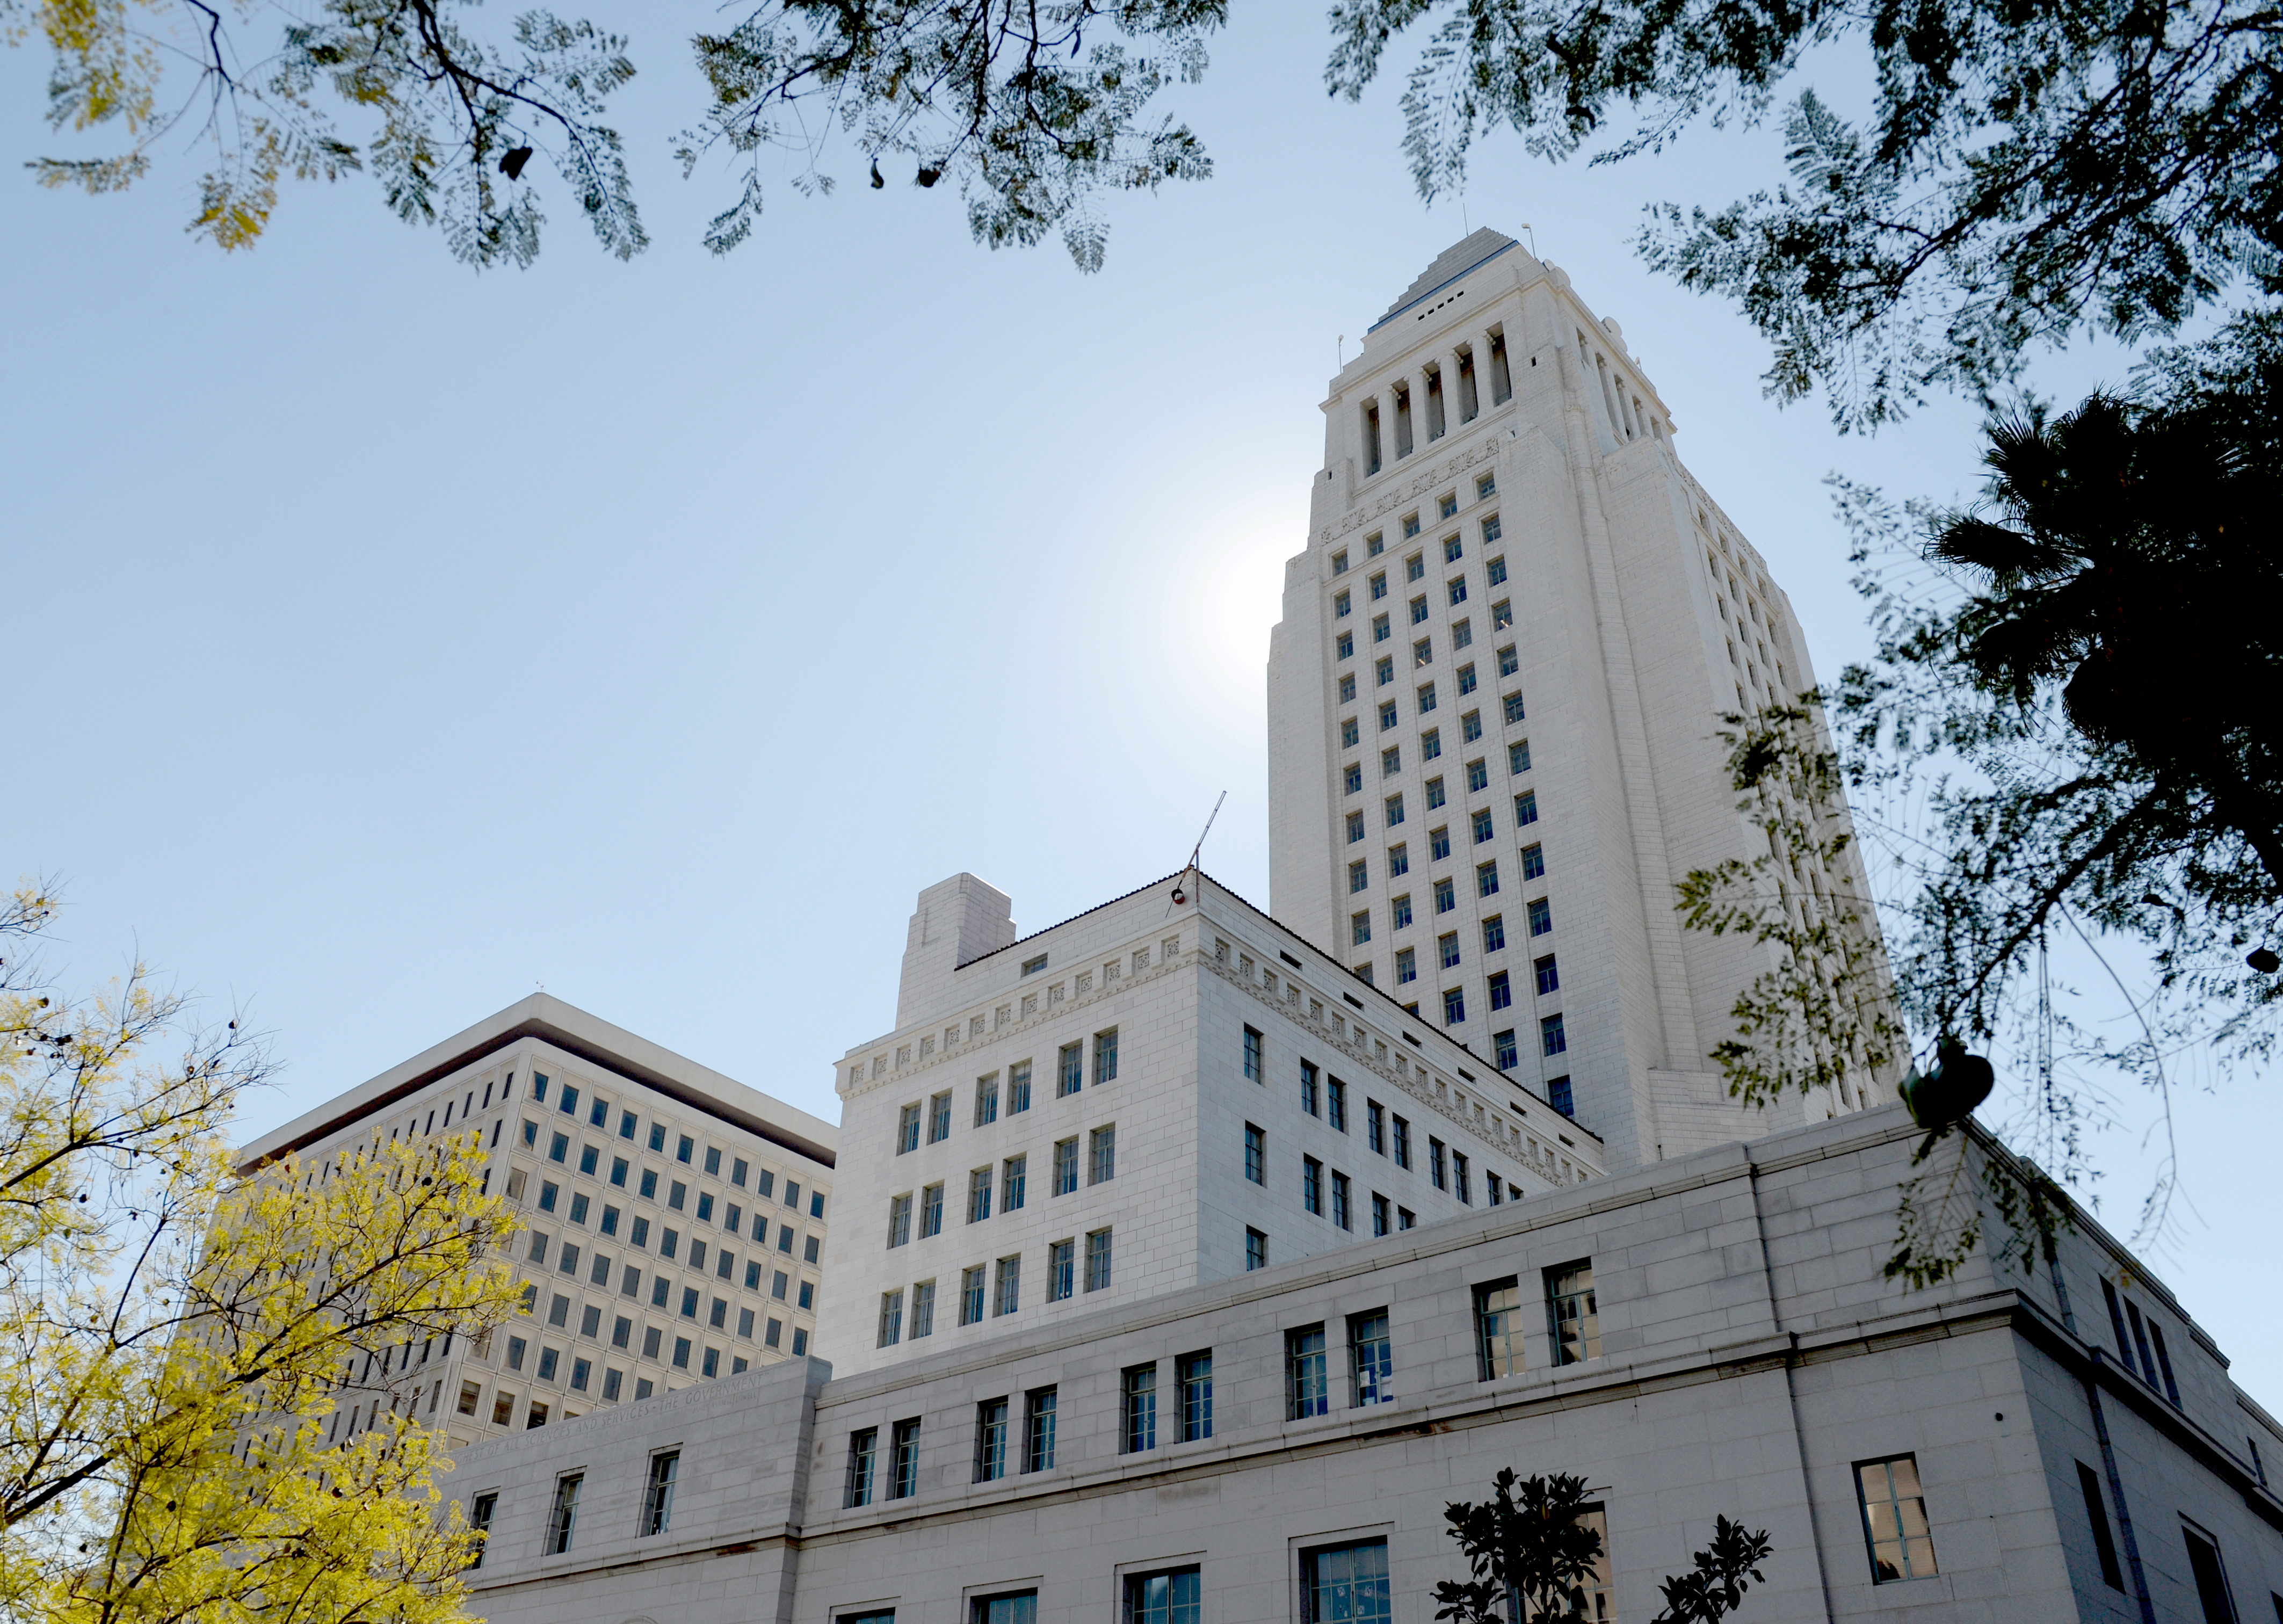 Los Angeles City Hall and City Hall East on Thursday, Feb. 7, 2019.  (Photo by Dean Musgrove, Los Angeles Daily News/SCNG)